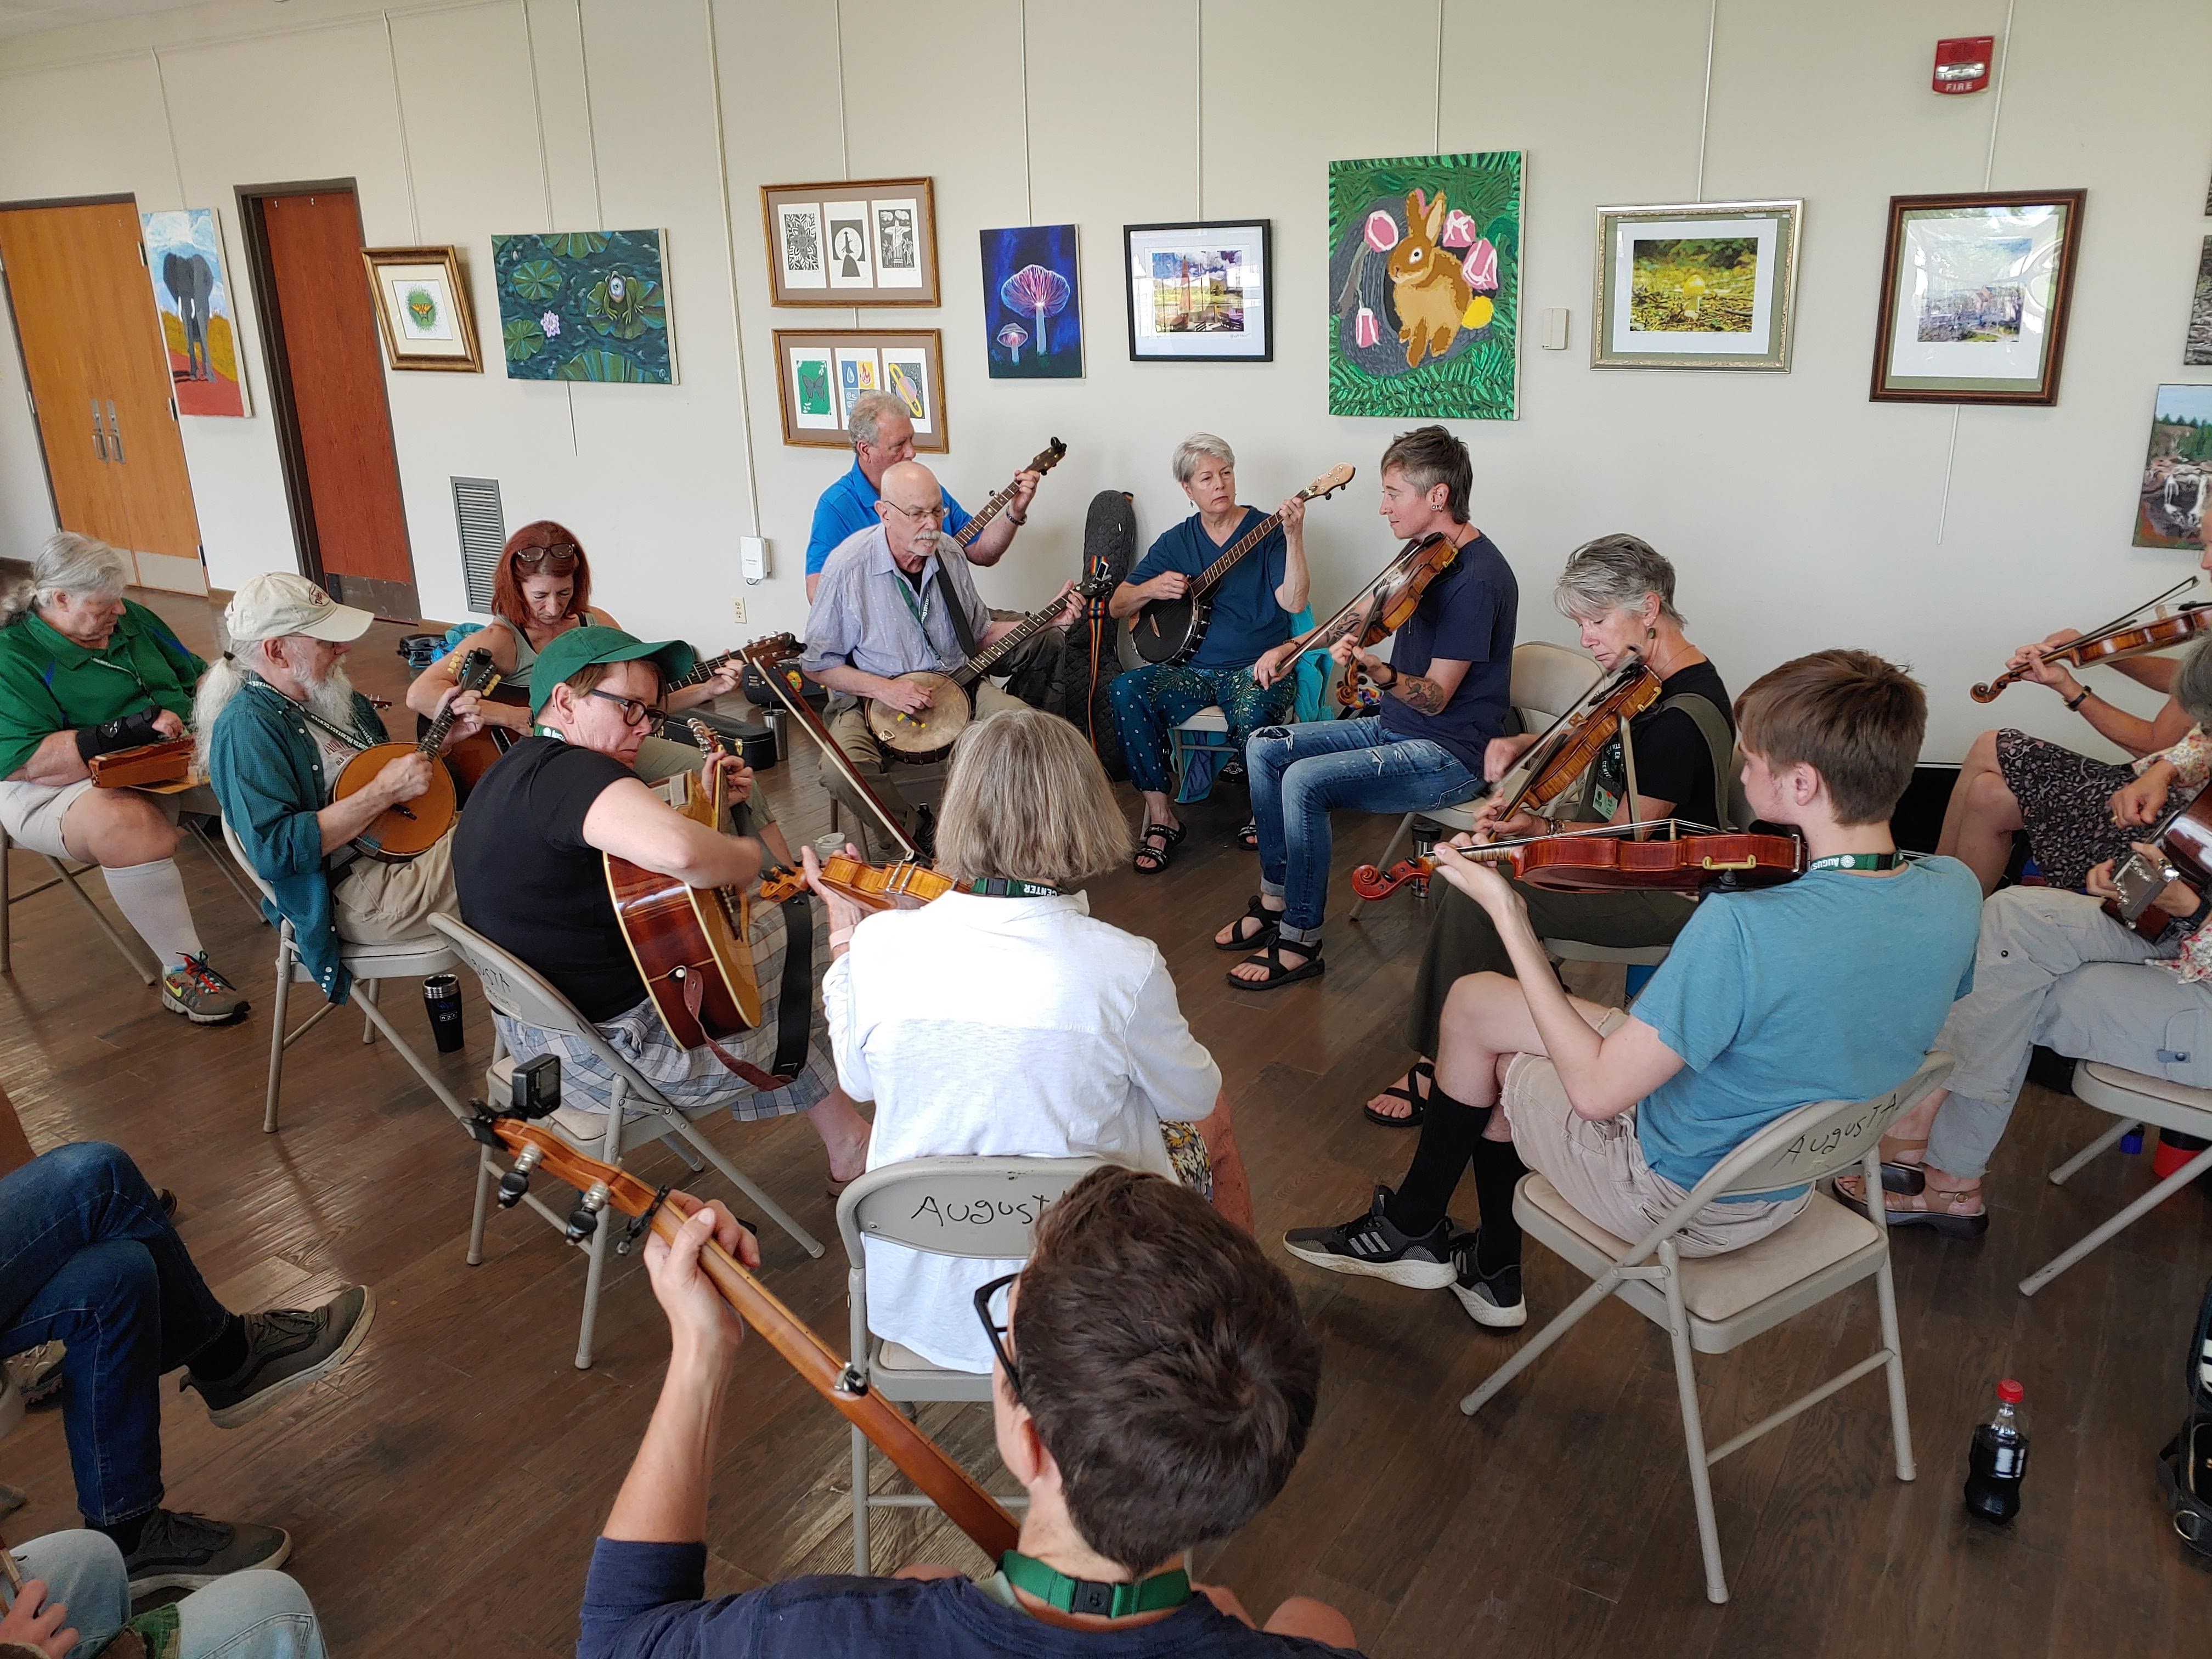 A group of about 15 people sit around a circle together playing fiddles, guitars, dulcimers, and banjos. Artwork hangs on the wall behind them.